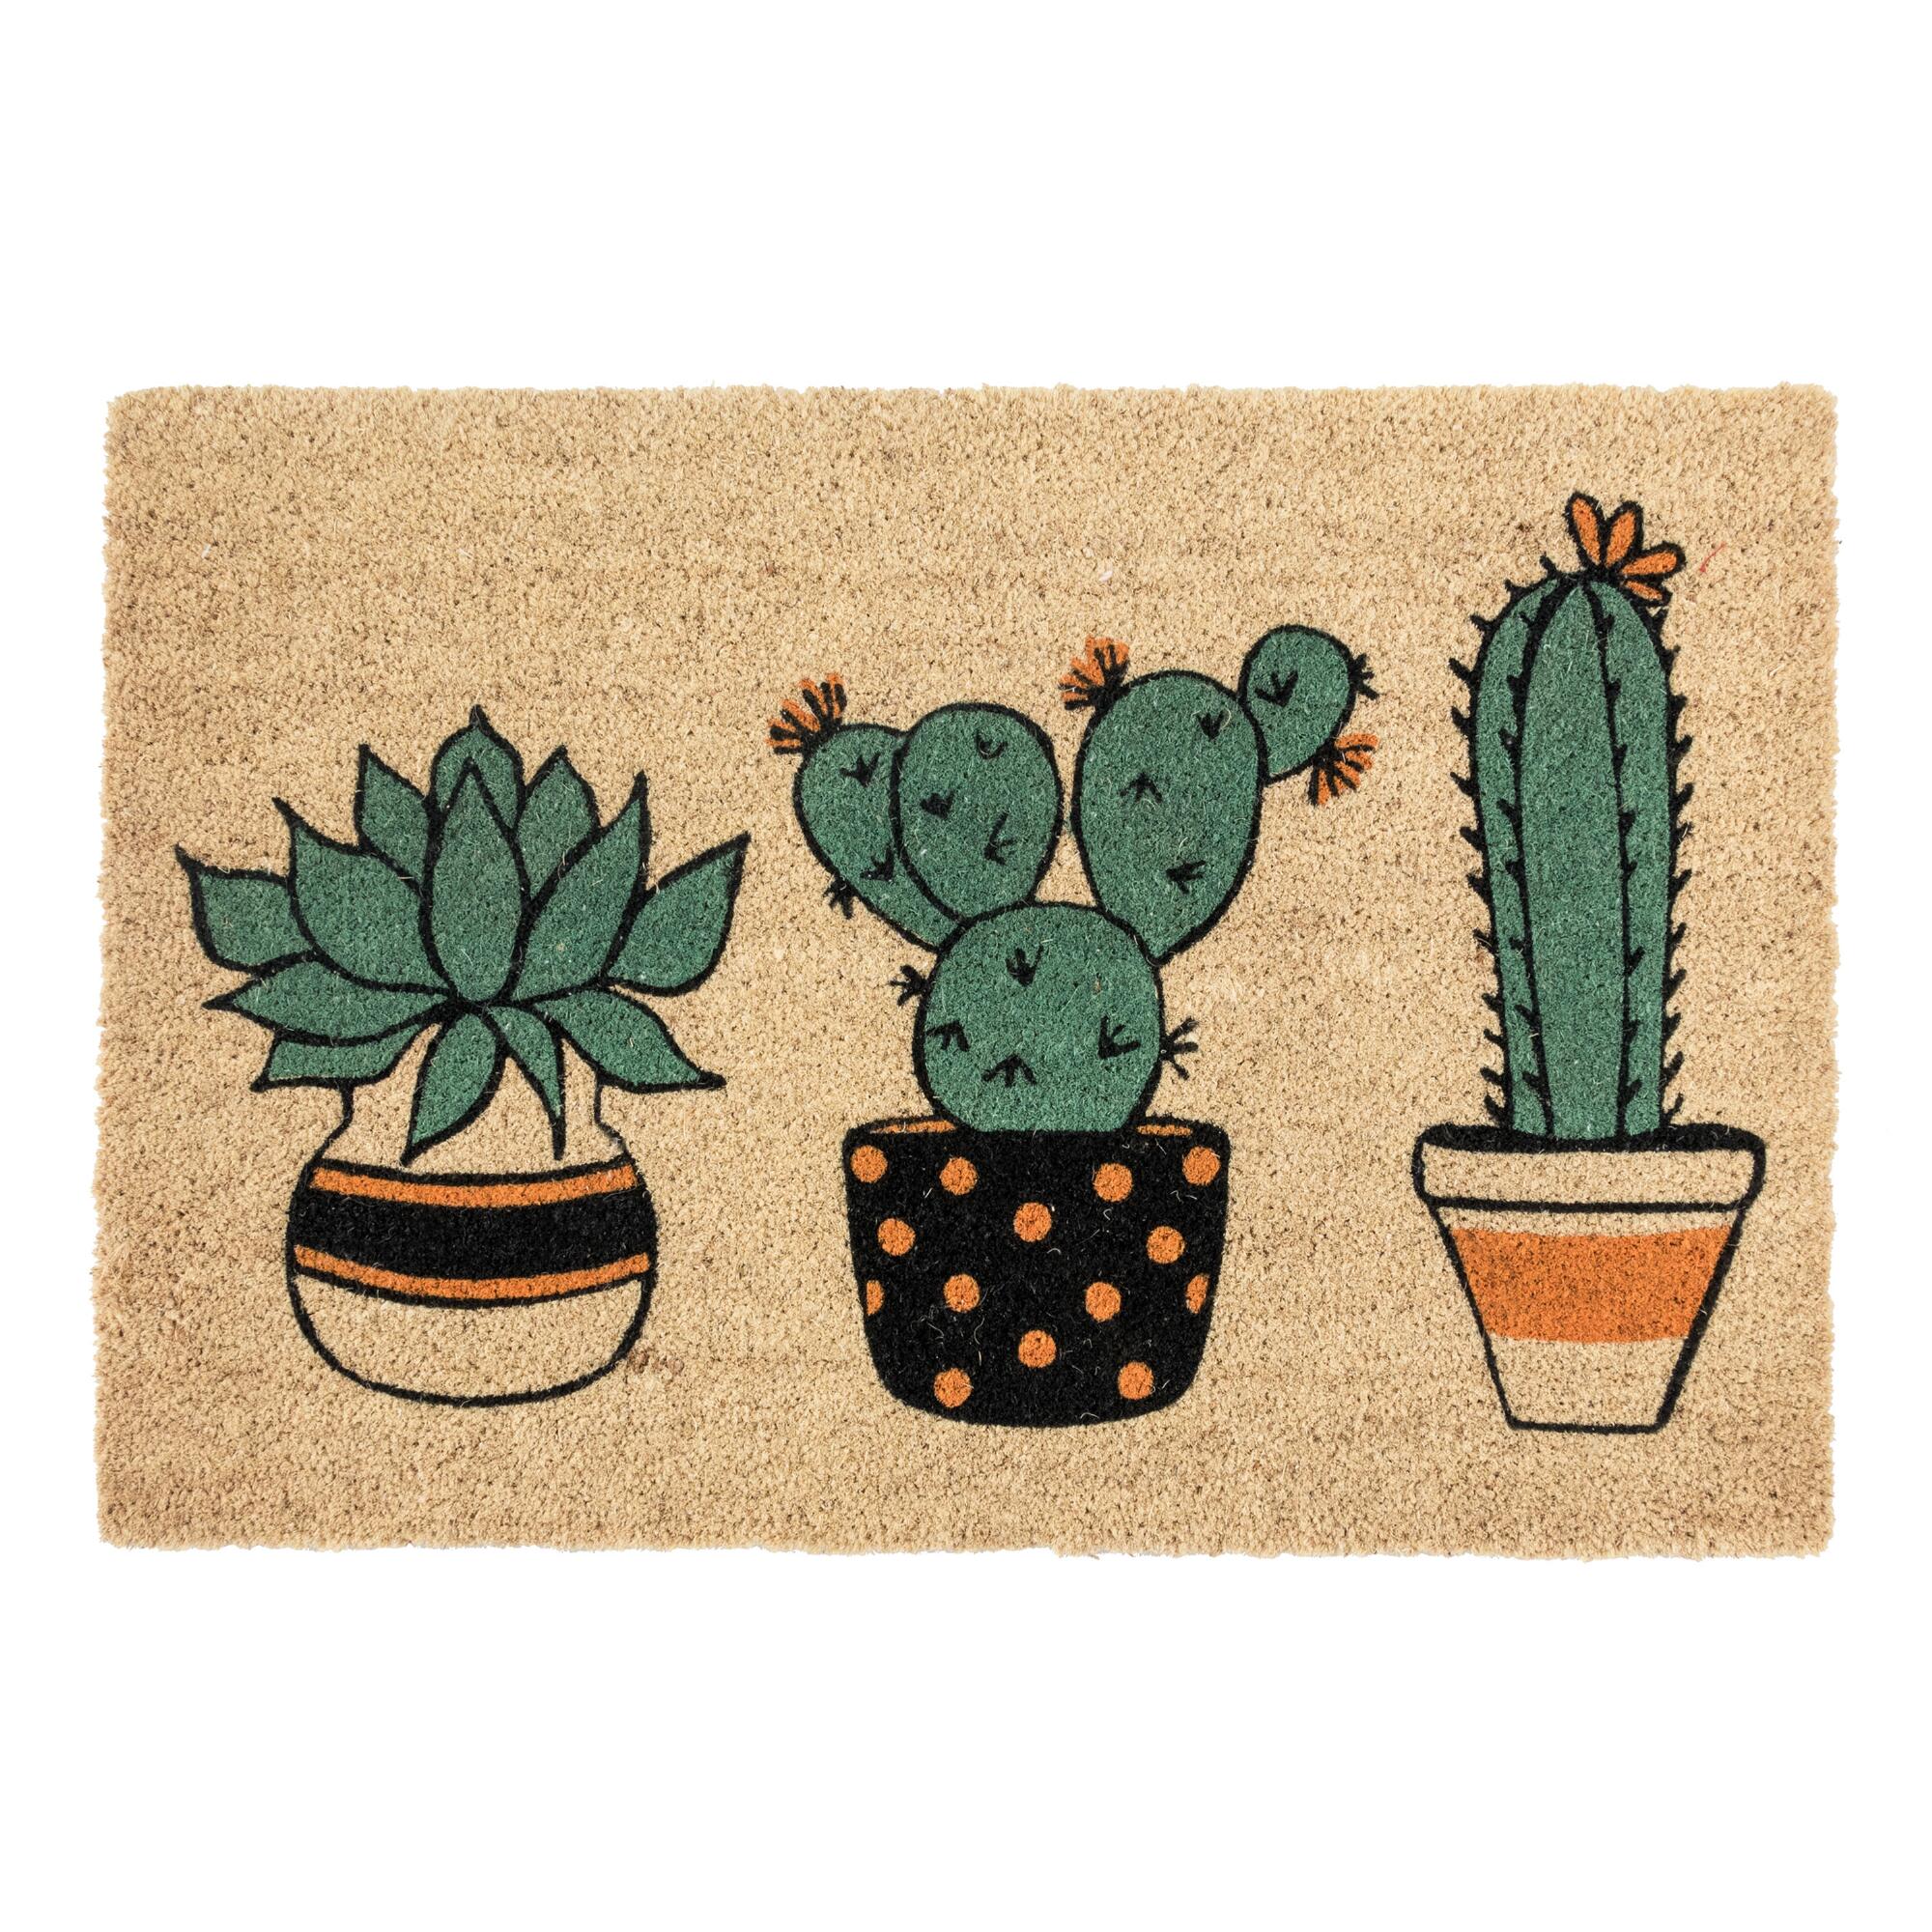 Potted Cactus Coir Doormat by World Market